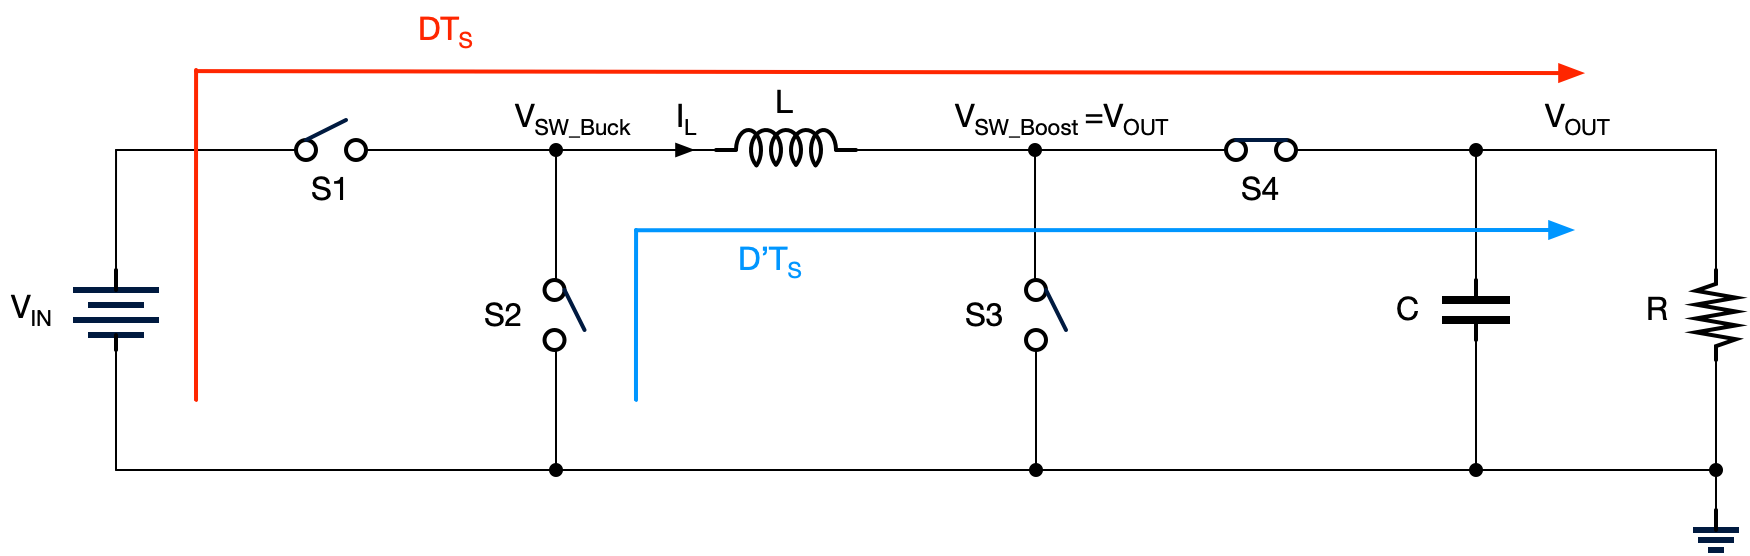 Buck configuration in four switch non-inverting Buck-Boost topology